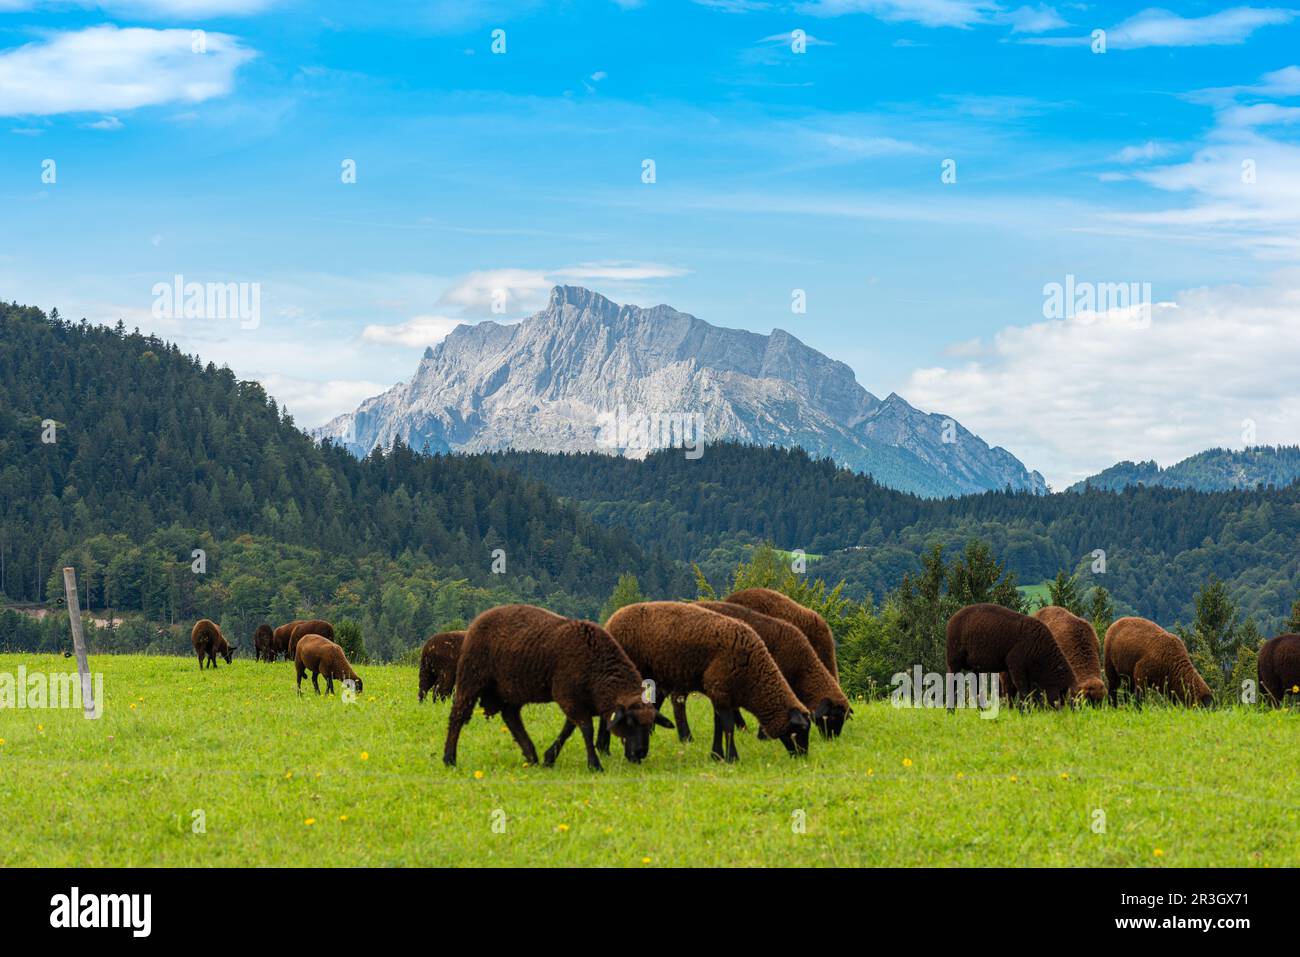 Mountain pastures, cattle breeding and woods in the Bavarian Alps around Berchtesgaden Stock Photo